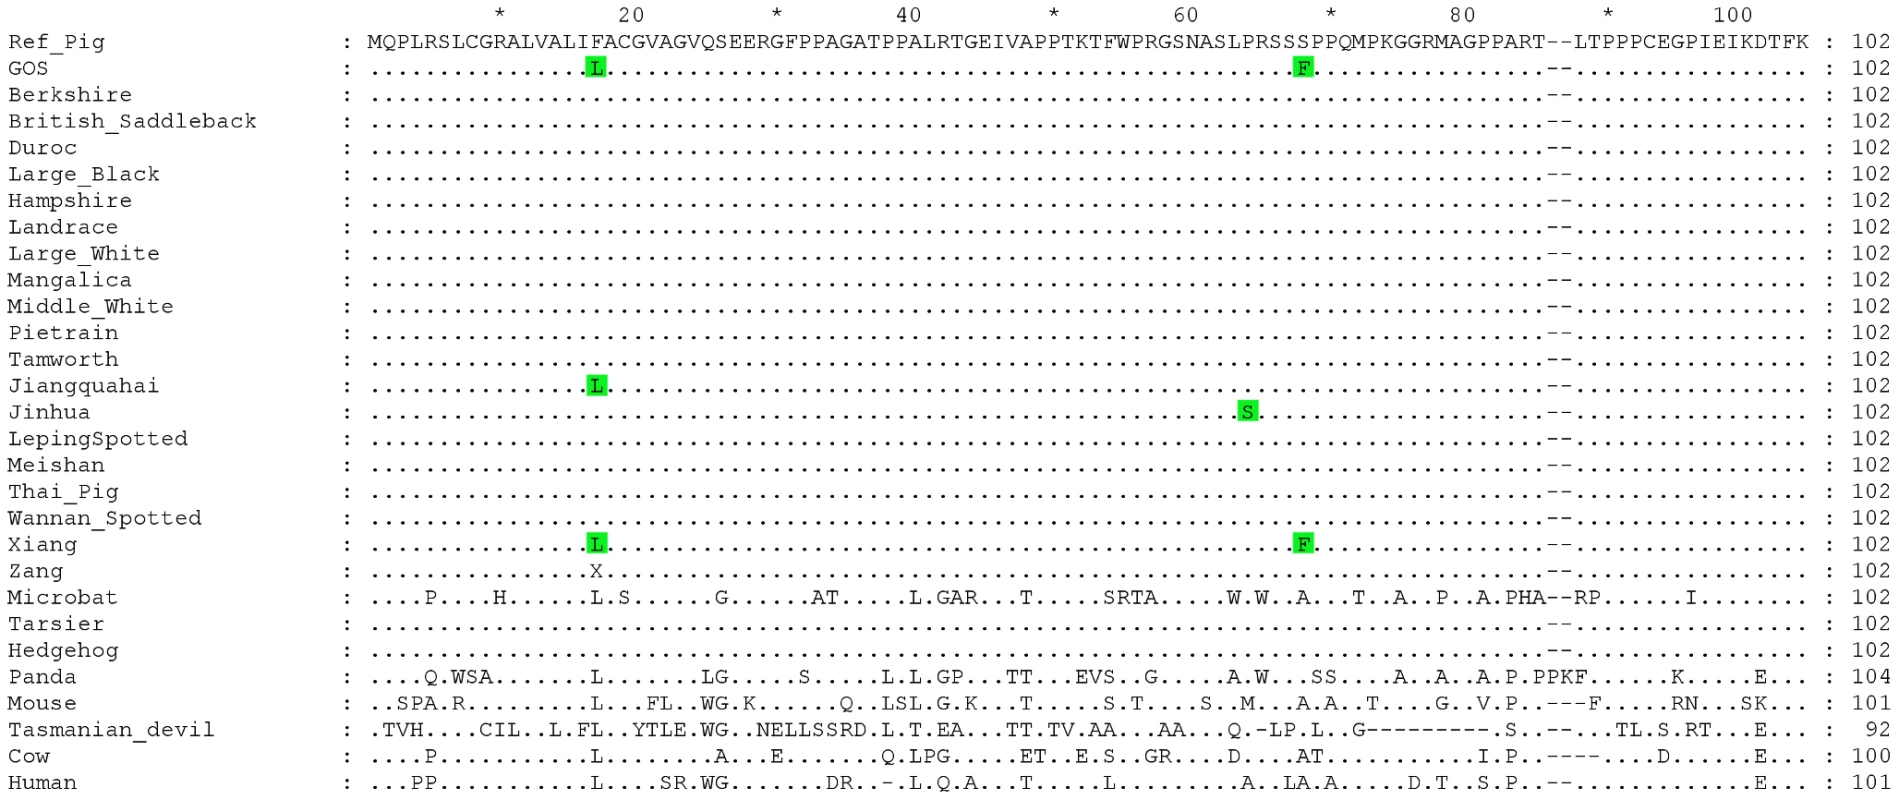 Multiple sequence alignment for the signal peptide and N-terminal extracellular domain of the EDNRB protein.